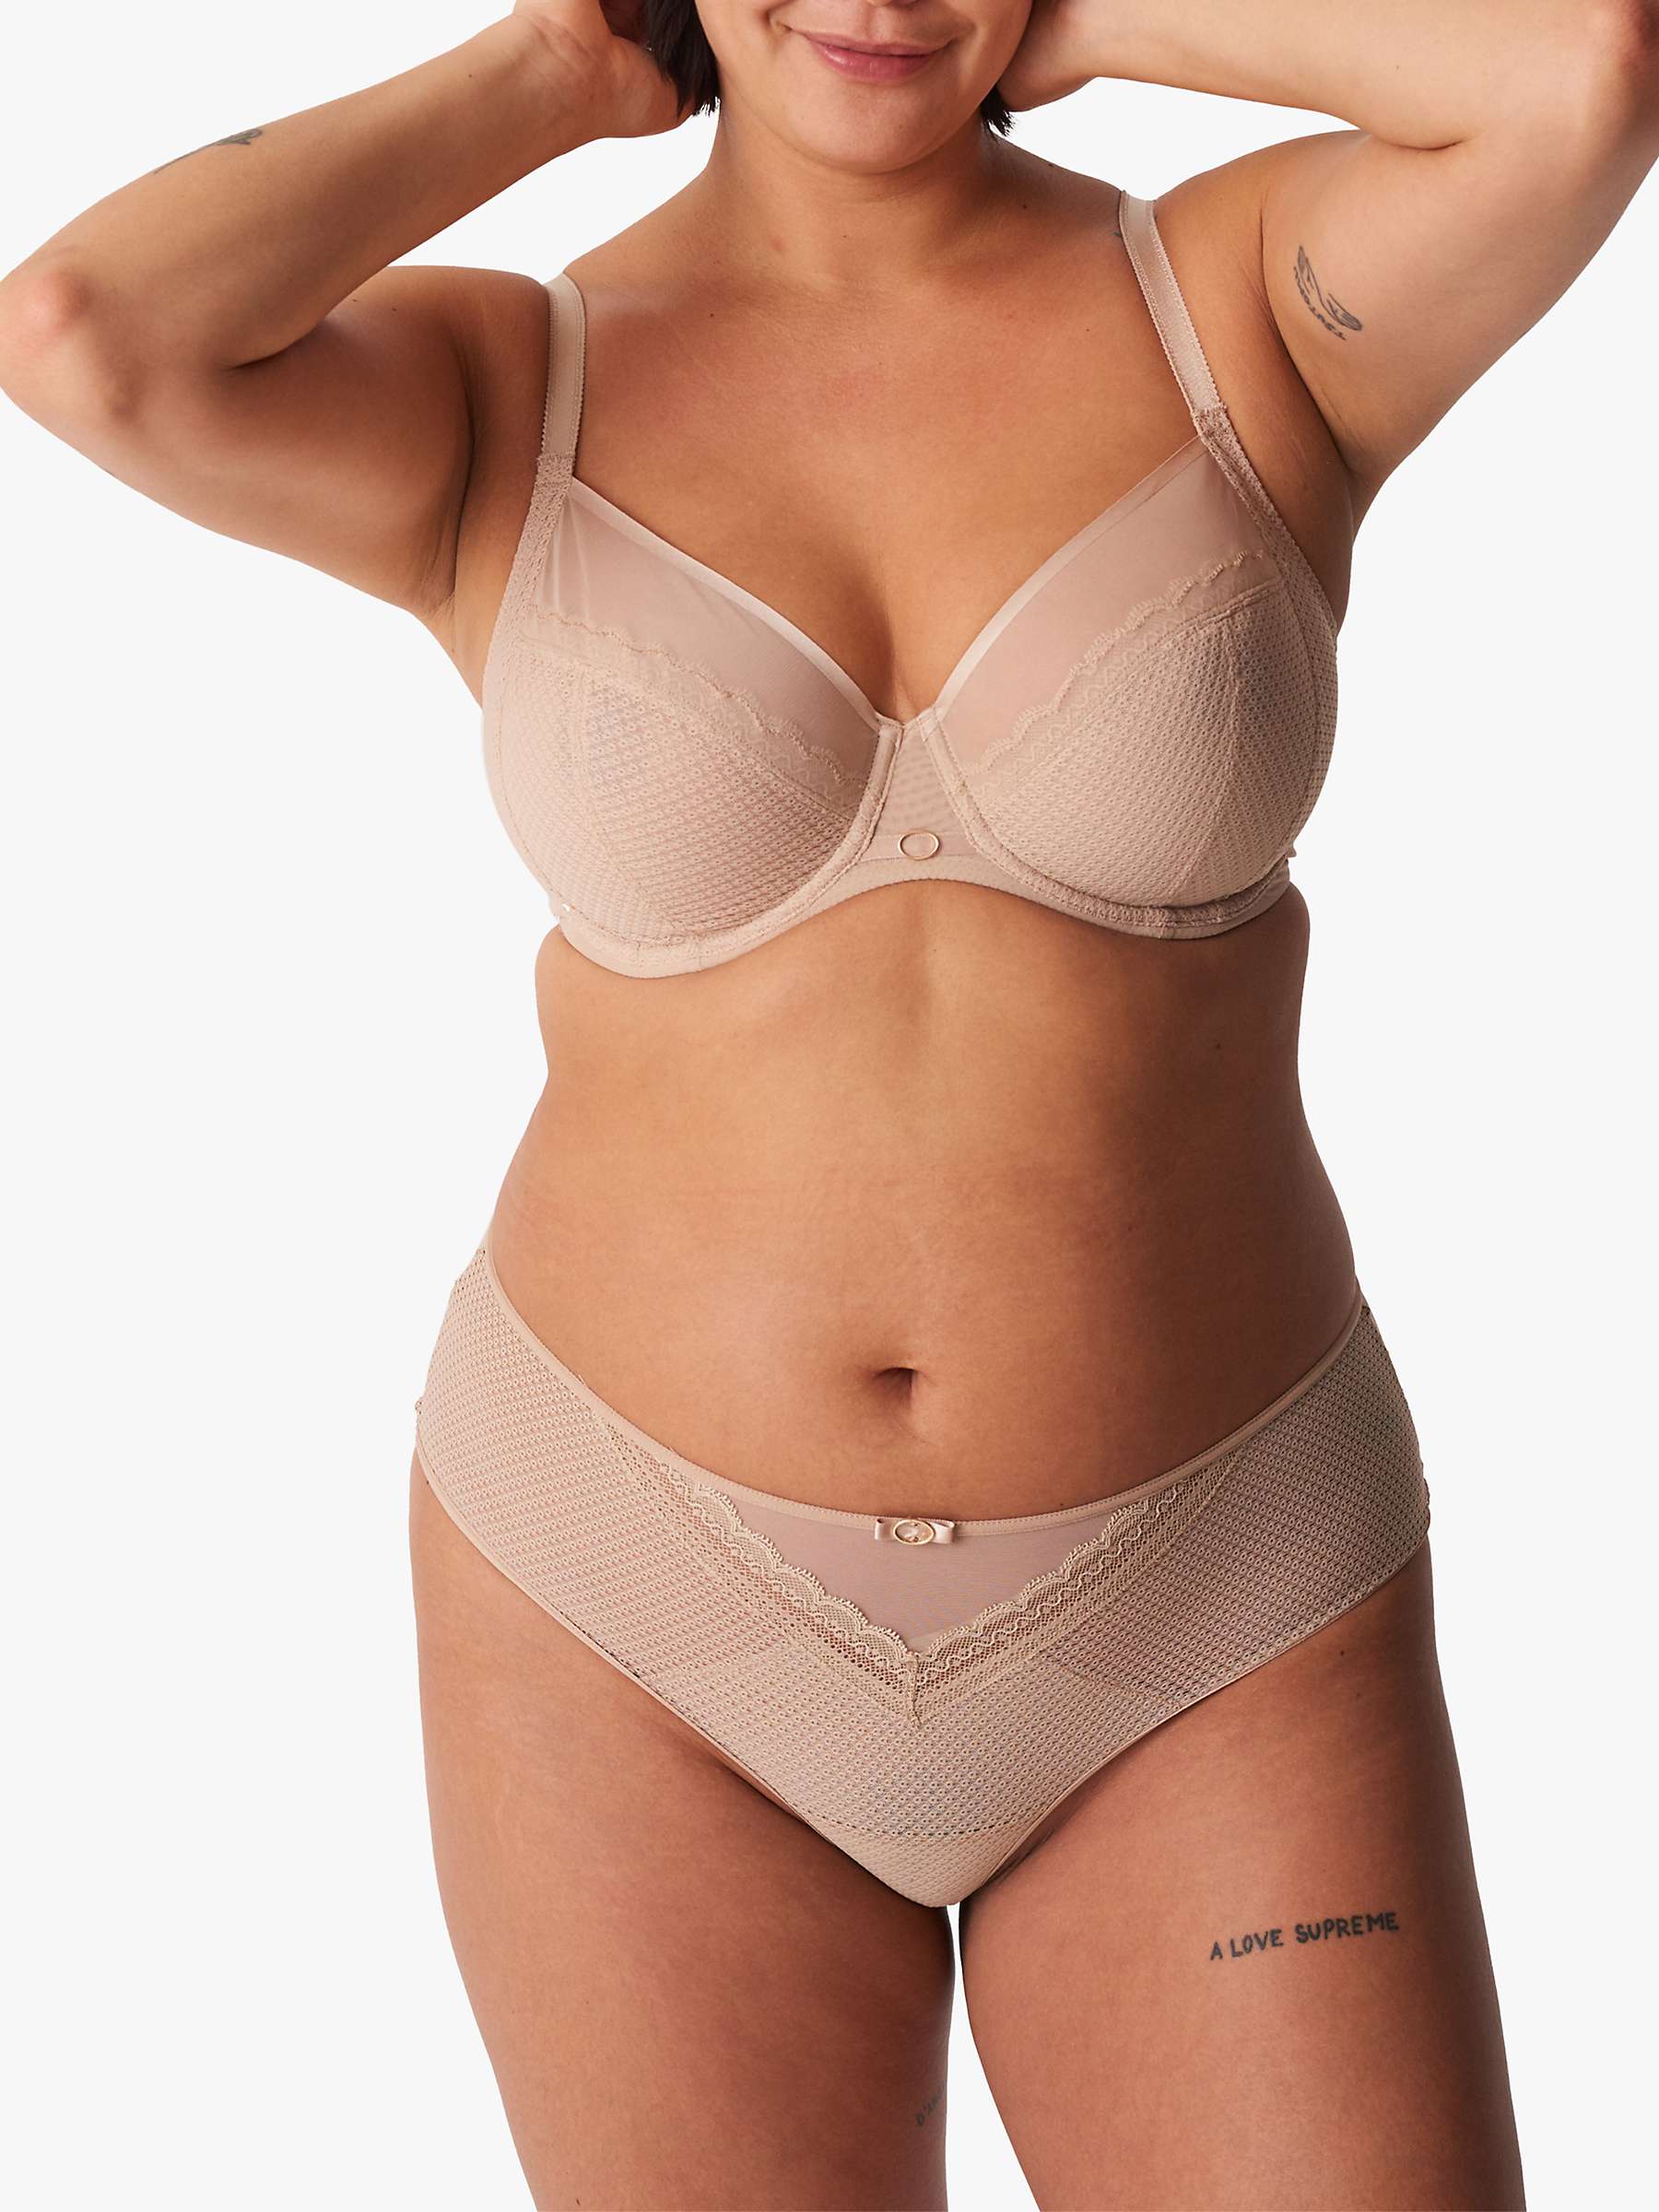 Buy Chantelle Parisian Allure Covering Underwired Bra Online at johnlewis.com